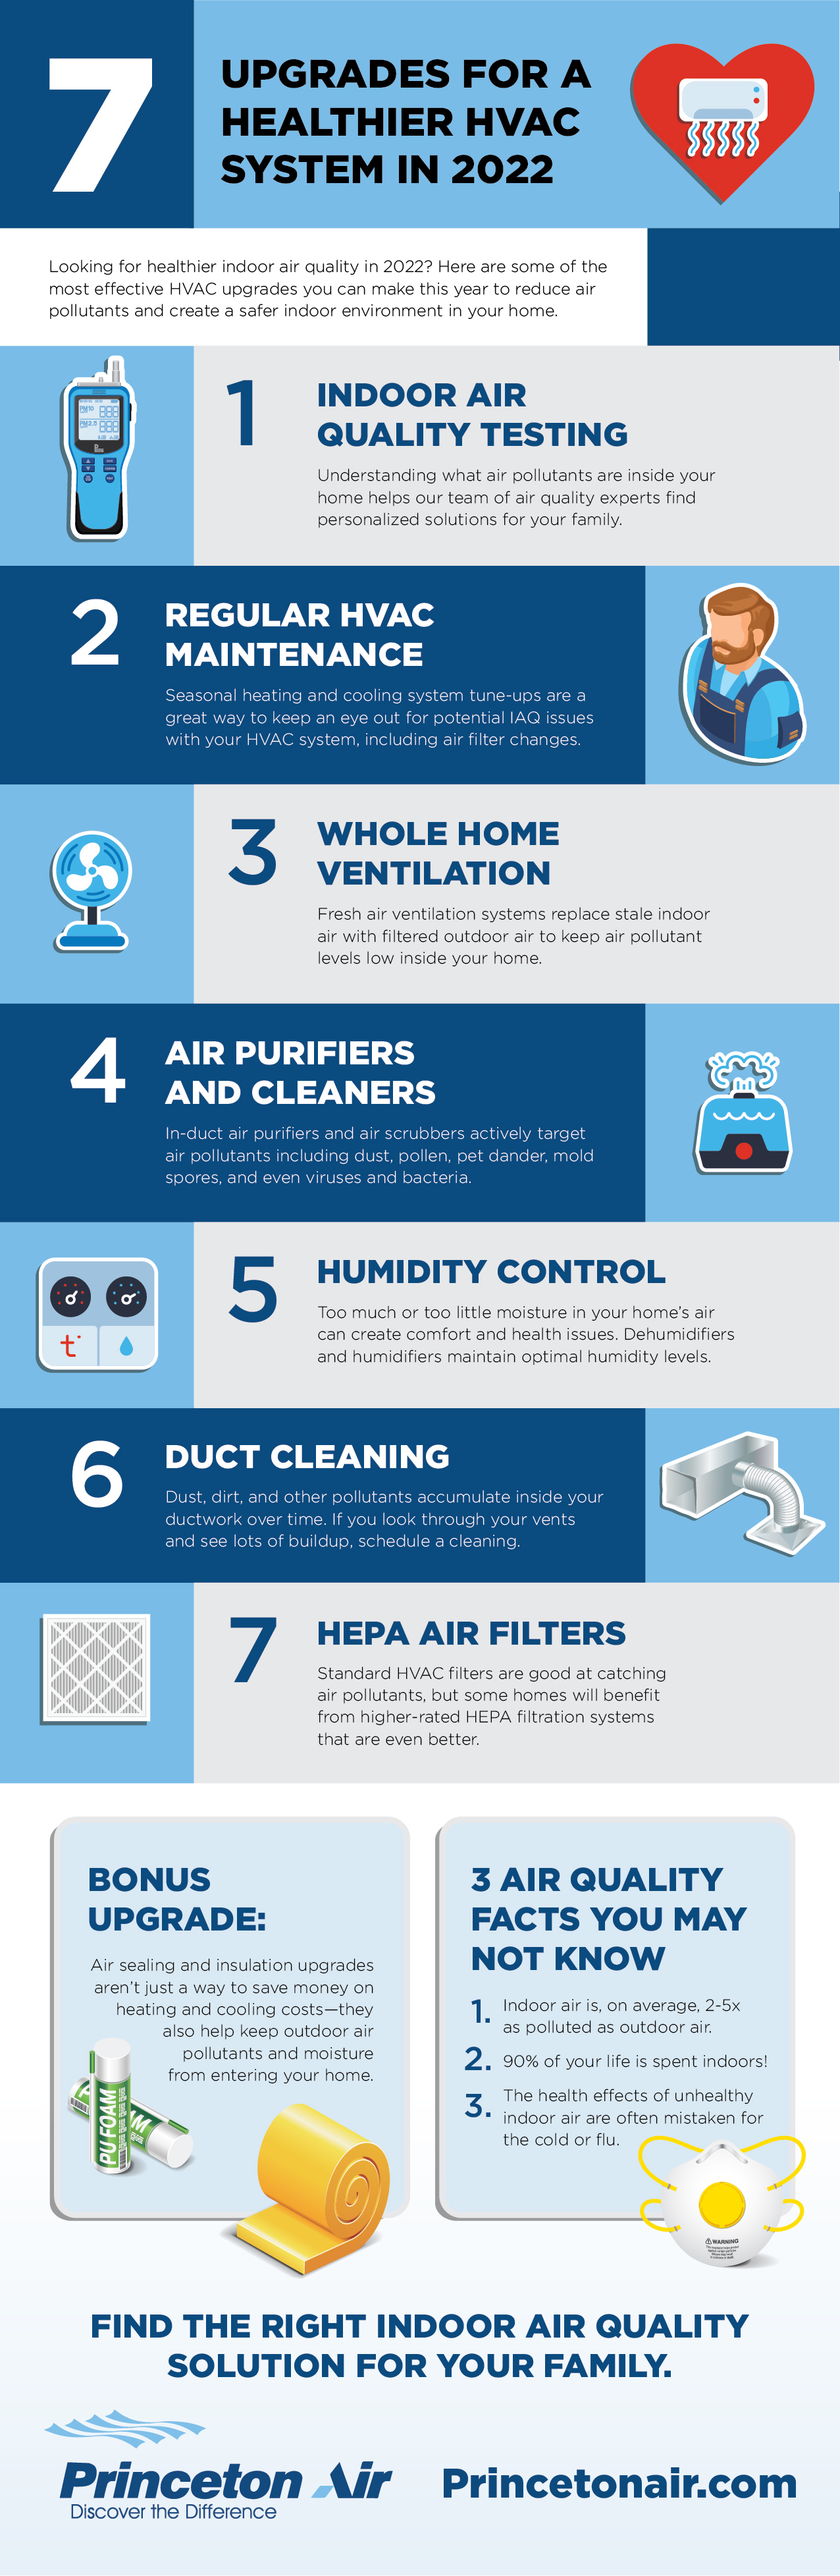 7 Upgrades for a Healthier HVAC System in 2022 Infographic